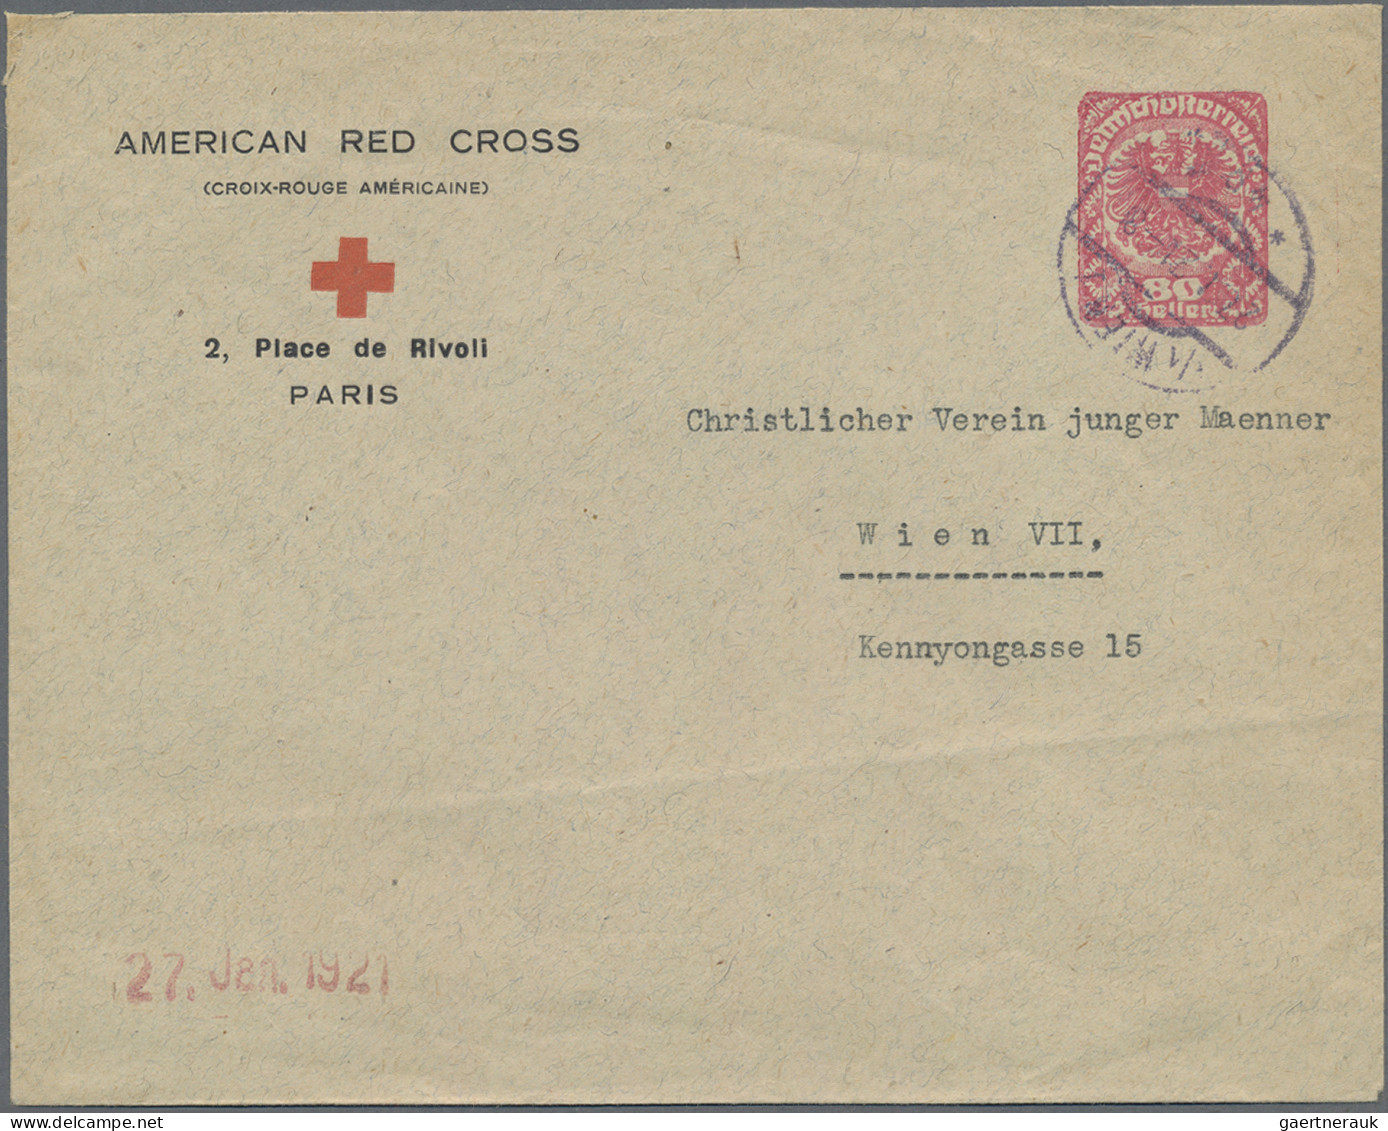 Thematics: Red Cross: 1921, "AMERICAN RED CROSS" (CROIX-ROUGE AMERICAINE) 2, Pla - Croce Rossa